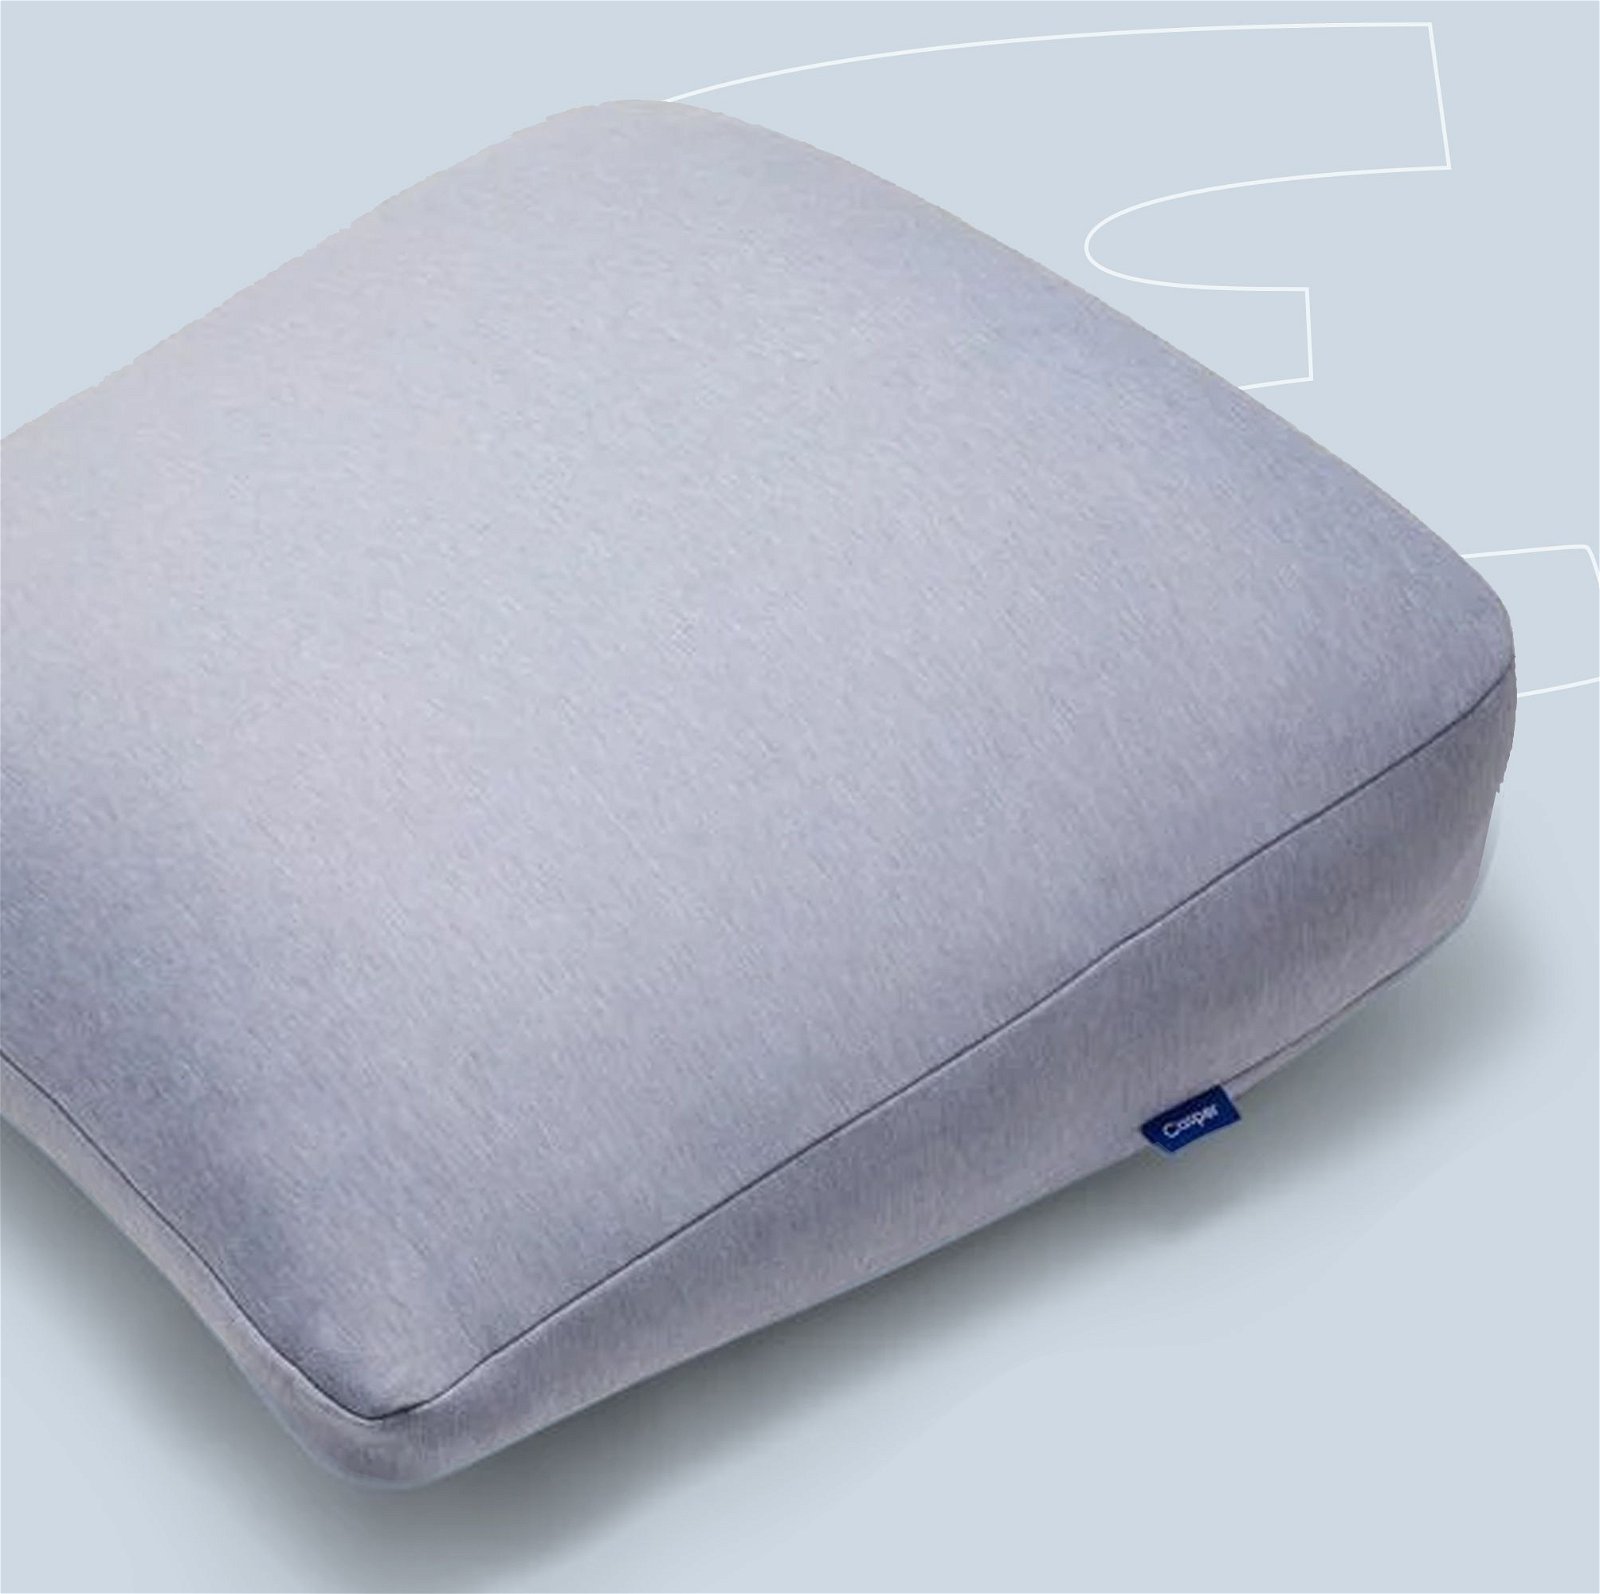 6 Pillows to Quell Your Snoring